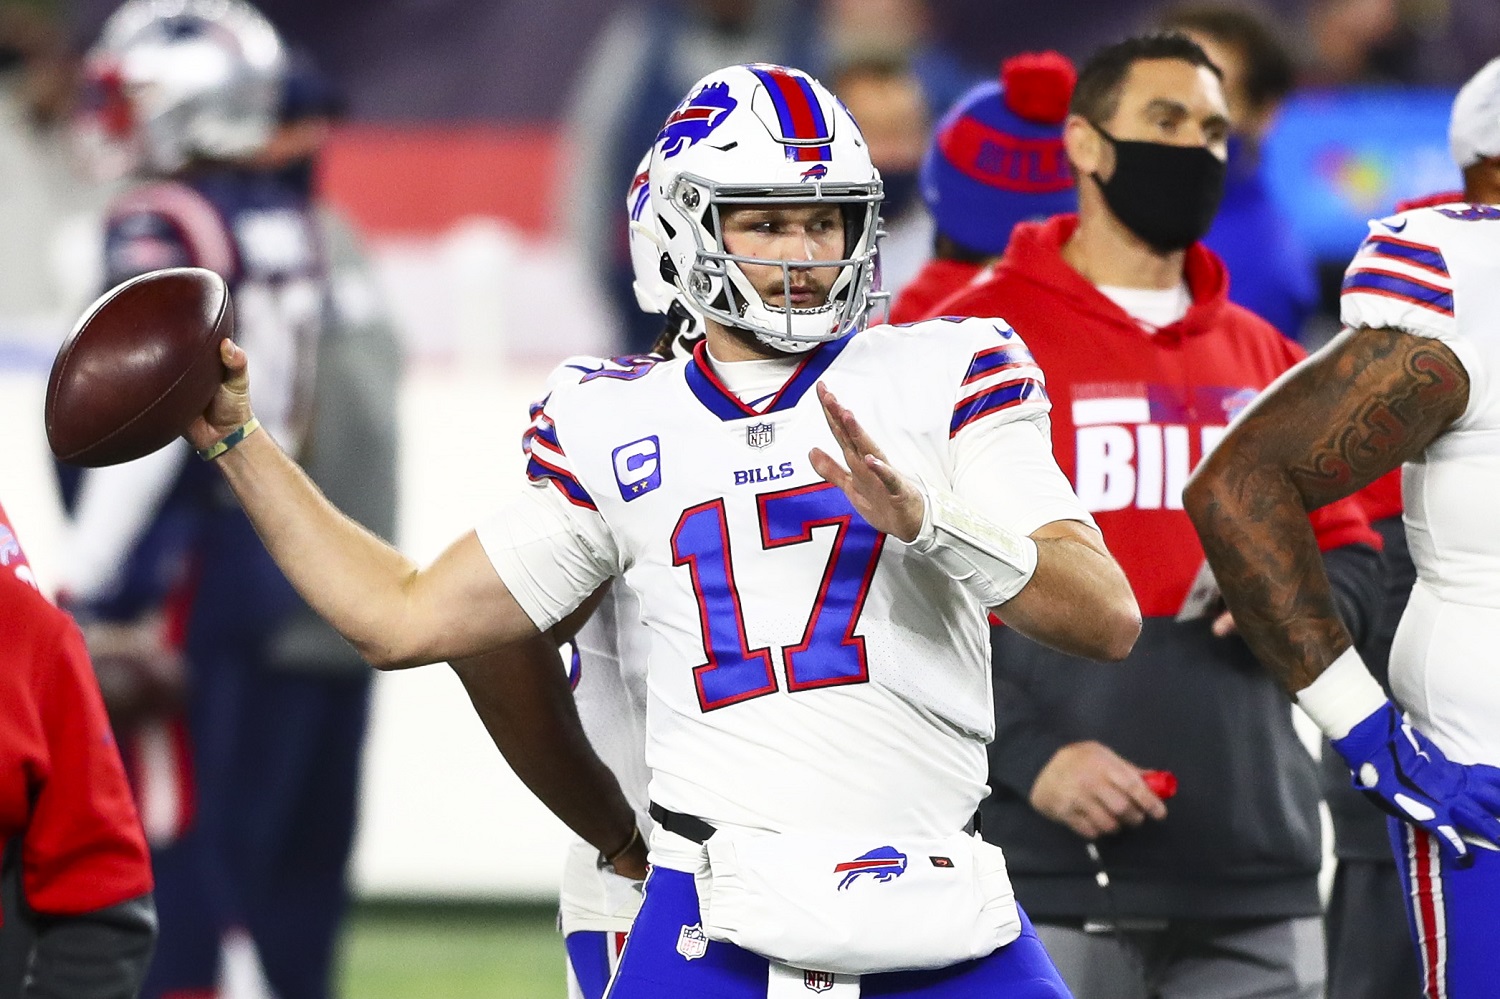 Josh Allen of the Buffalo Bills warms up before a game against the New England Patriots at Gillette Stadium on Dec. 28, 2020.